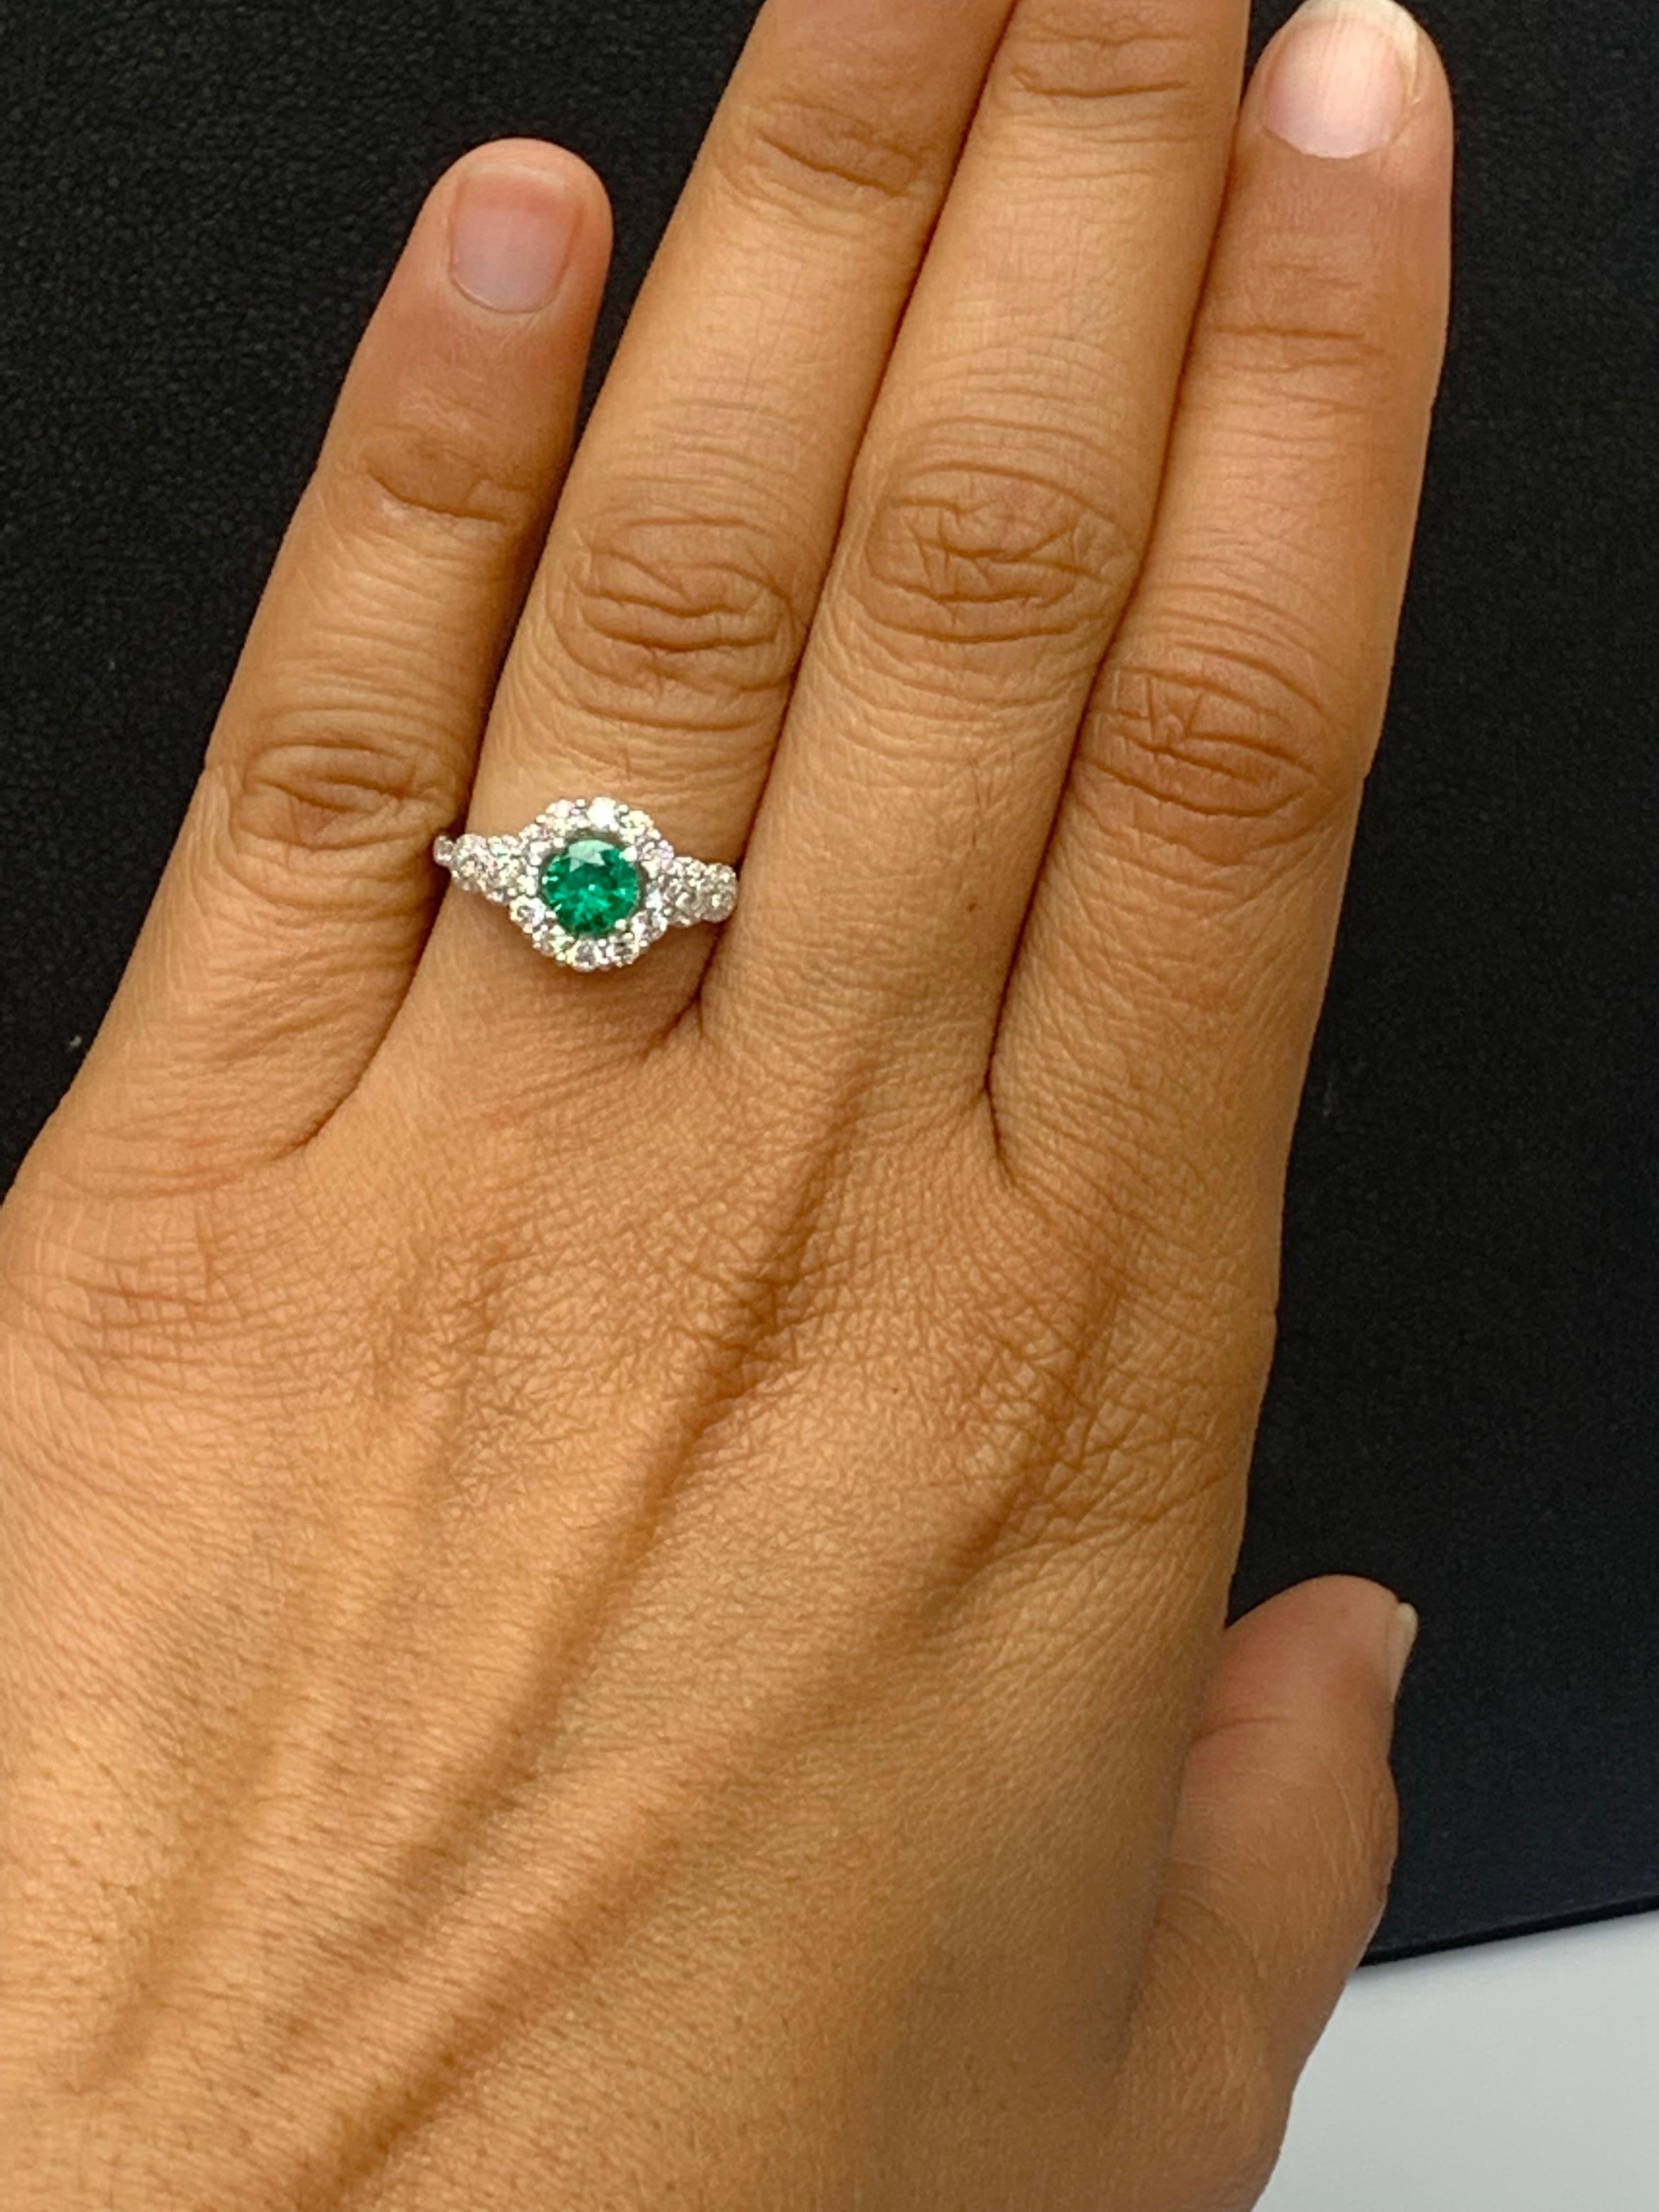 0.62 Carat Round Cut Emerald and Diamond Fashion Ring in 18k White Gold For Sale 5